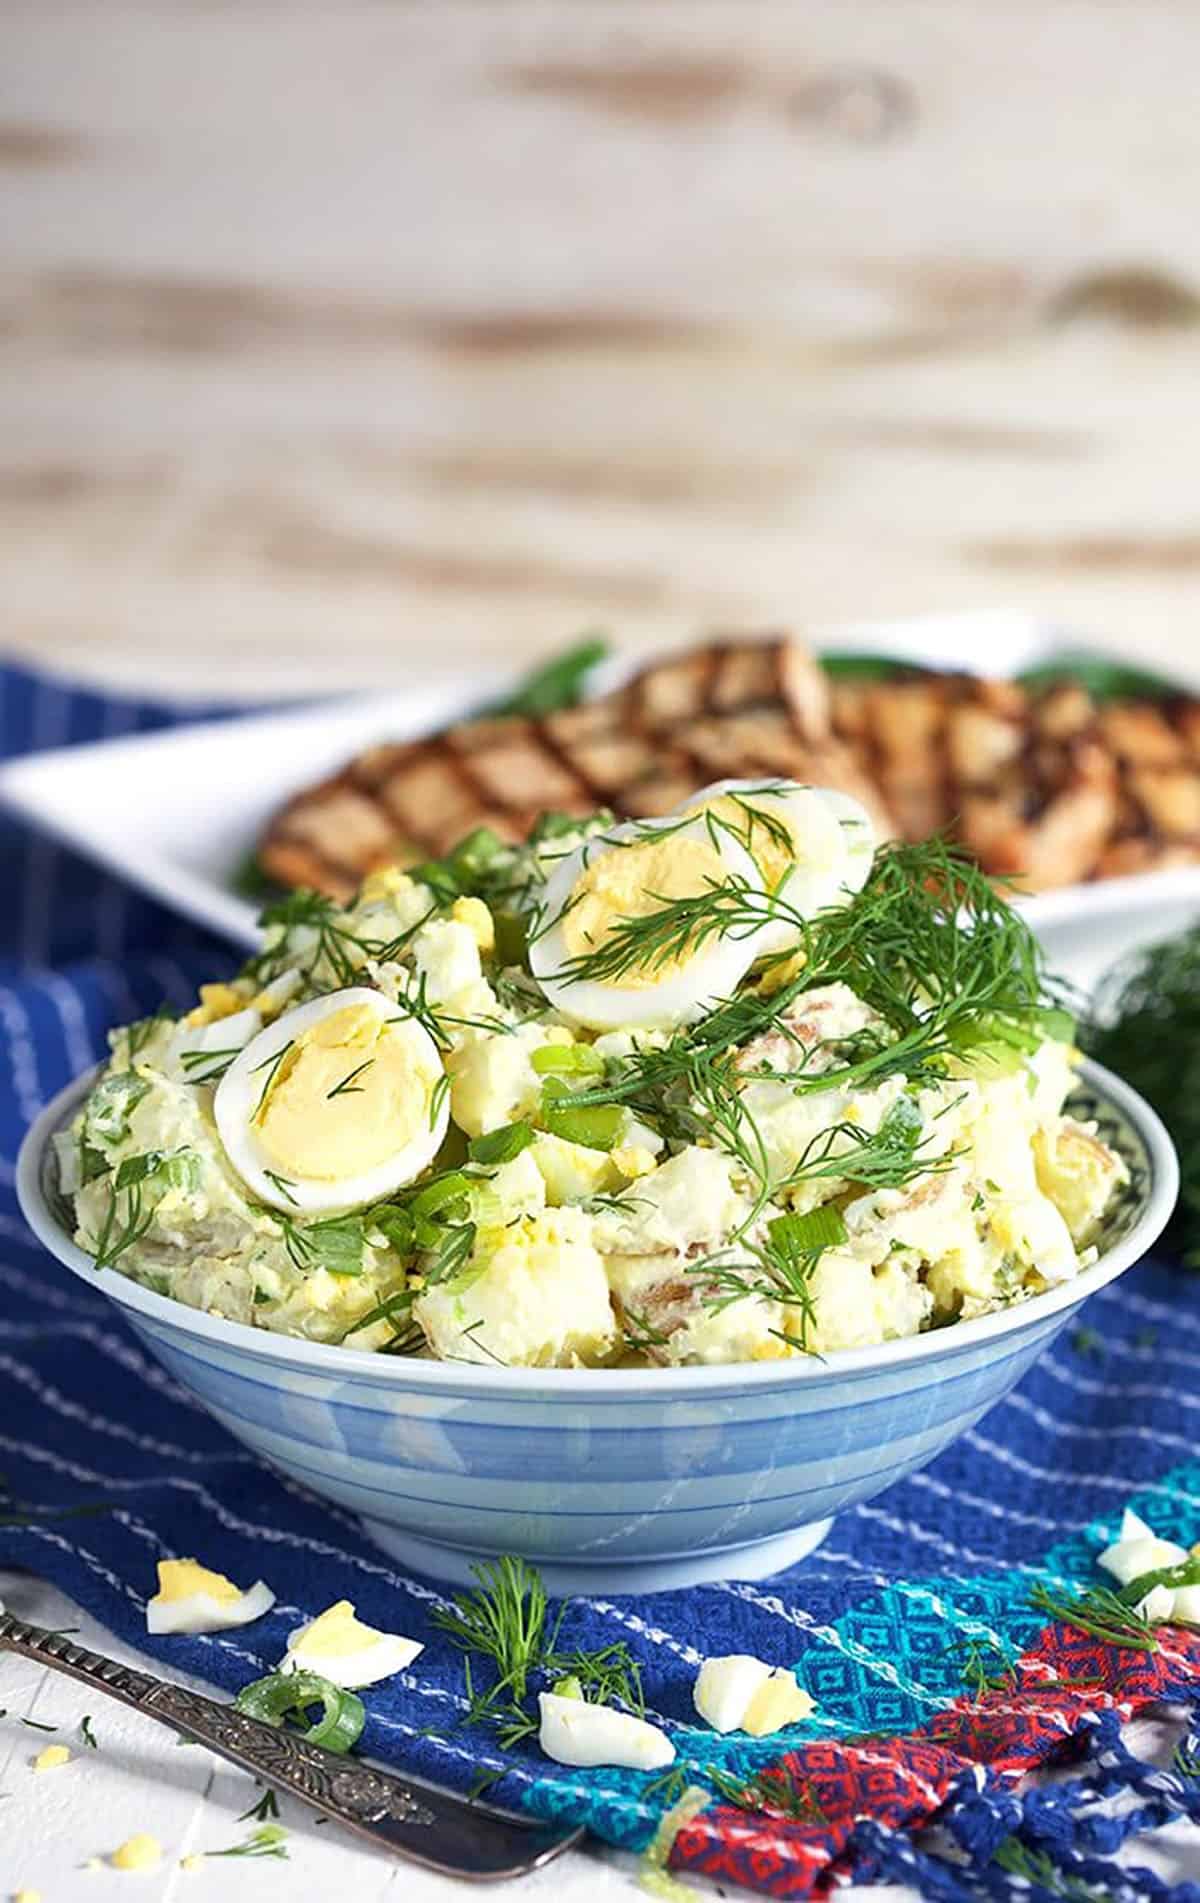 Dilly Potato & Egg Salad Recipe: How to Make It